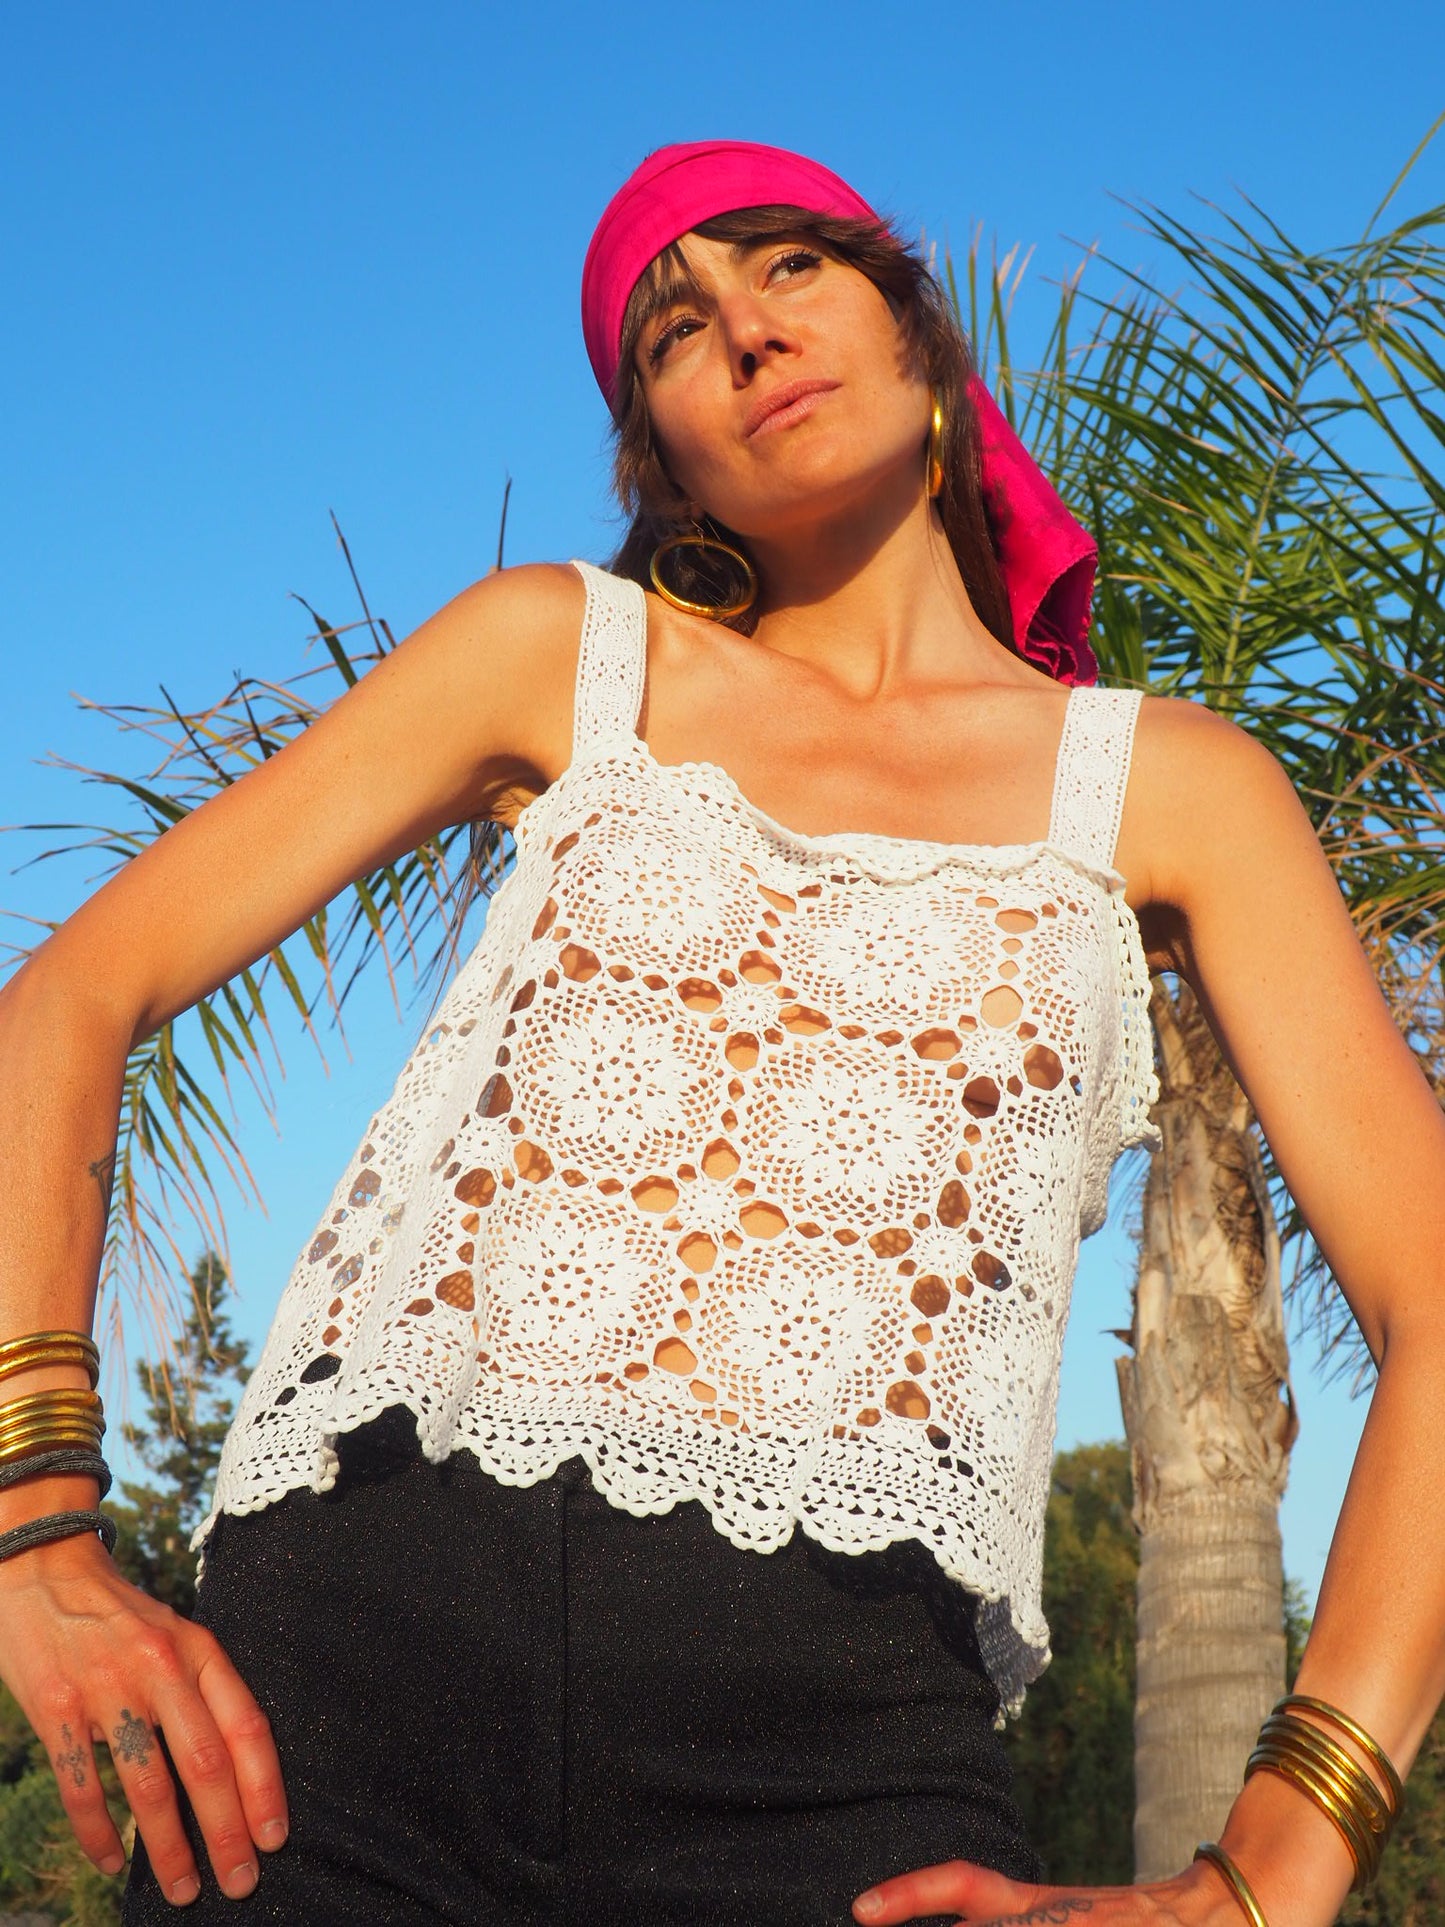 Antique vintage handmade white lace crochet crop top up-cycled by Vagabond Ibiza